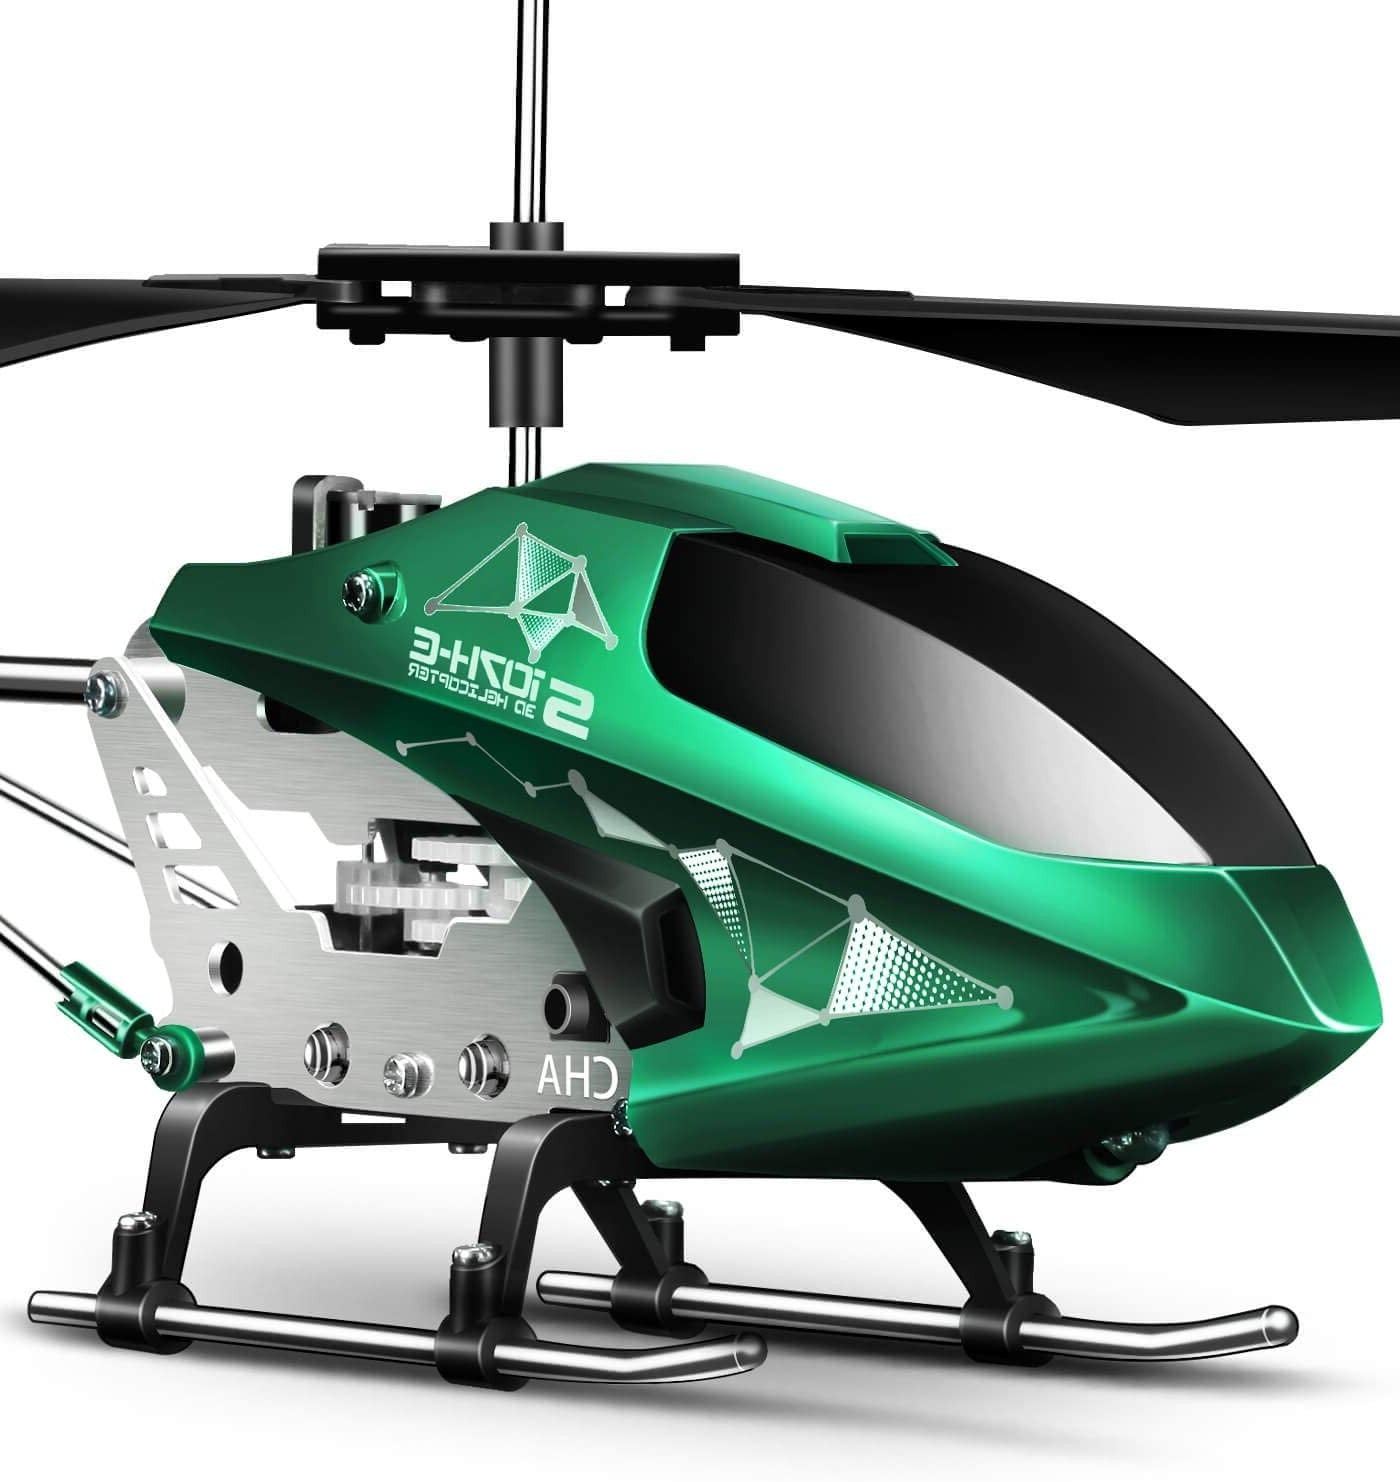 A green colored remote control helicopter with altitude hold. Model number S107H-E